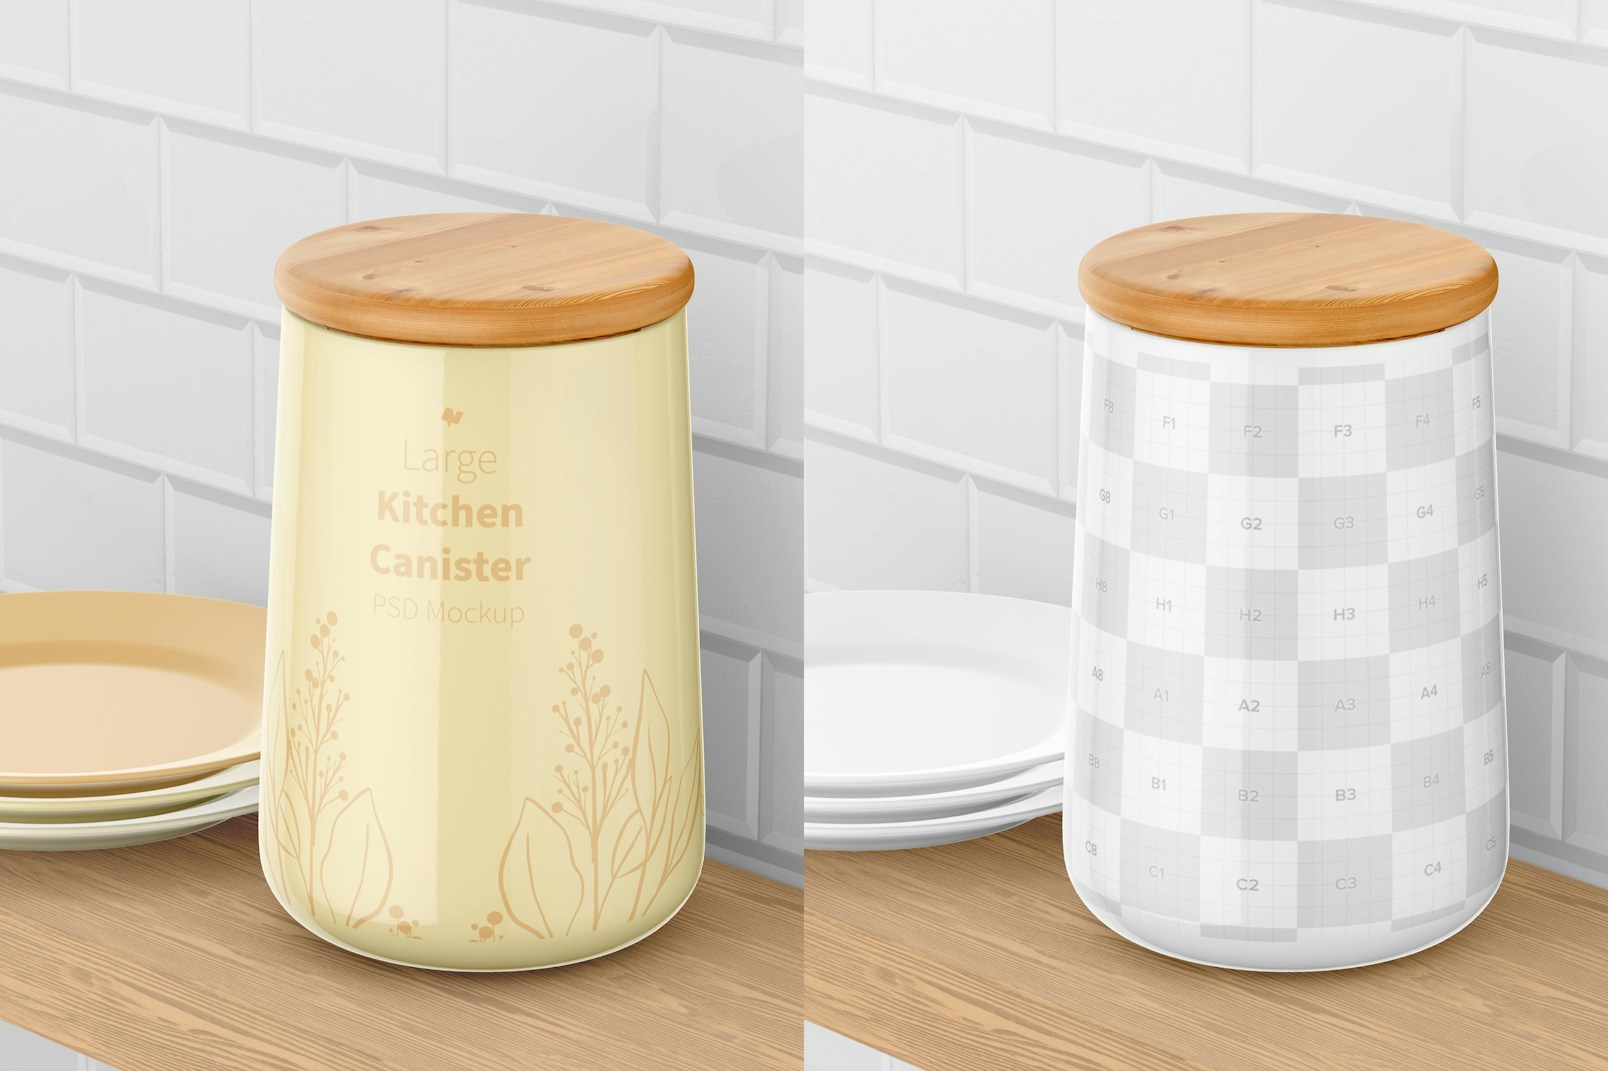 Large Kitchen Canister Mockup, Perspective